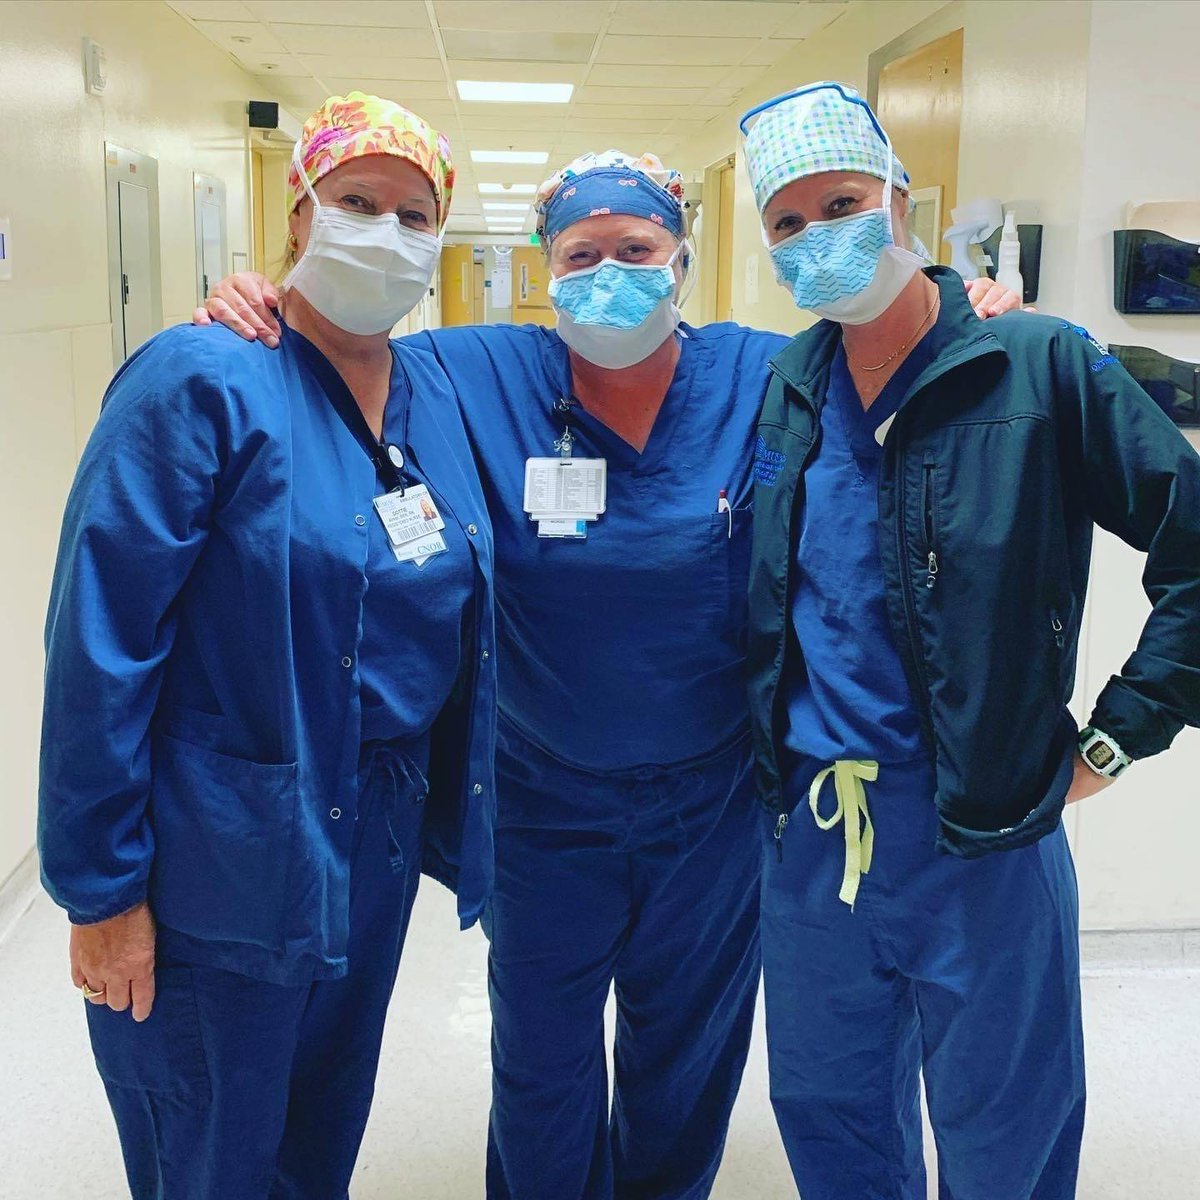 For Liz Frichtel, RN, orthopedics operating room surgical coordinator, #ChangingWhatsPossible means 'doing the things other hospitals told a patient they couldn't help them with.'
#NursesMonth #OurNursesOurFuture

@MUSCNursing @muscalumni @MedUnivSC